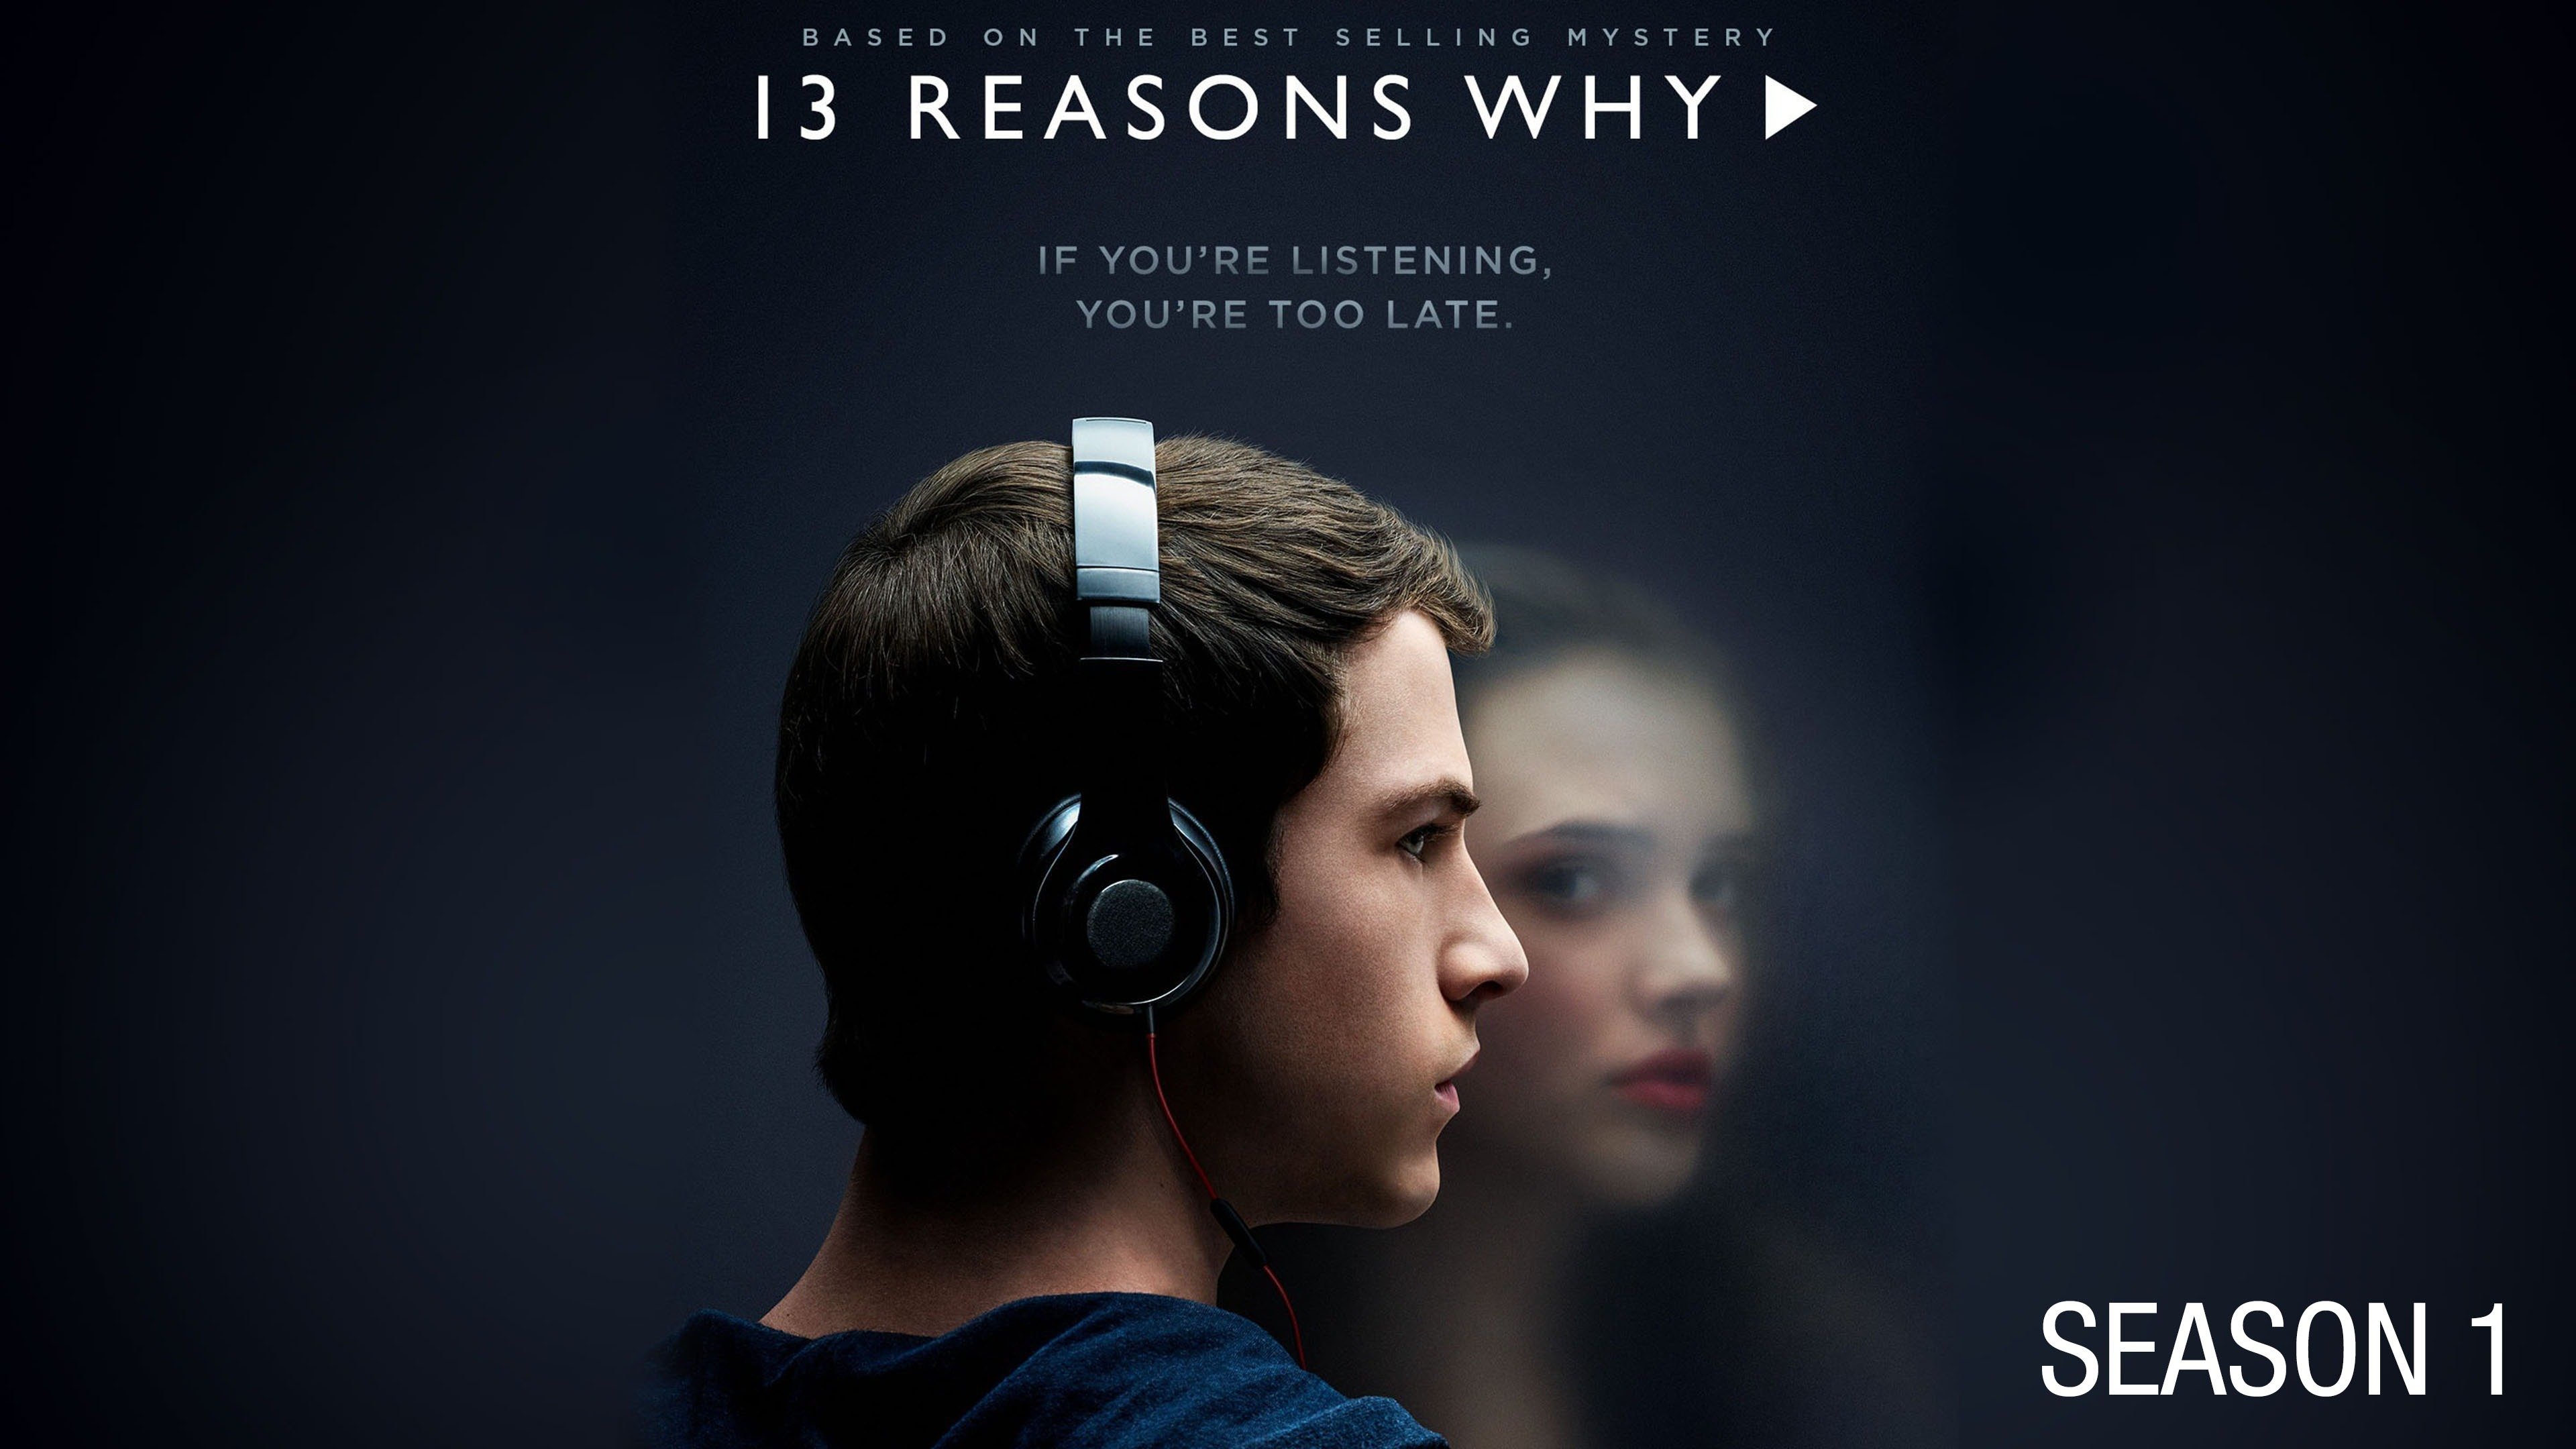 13 reasons why rapping scene